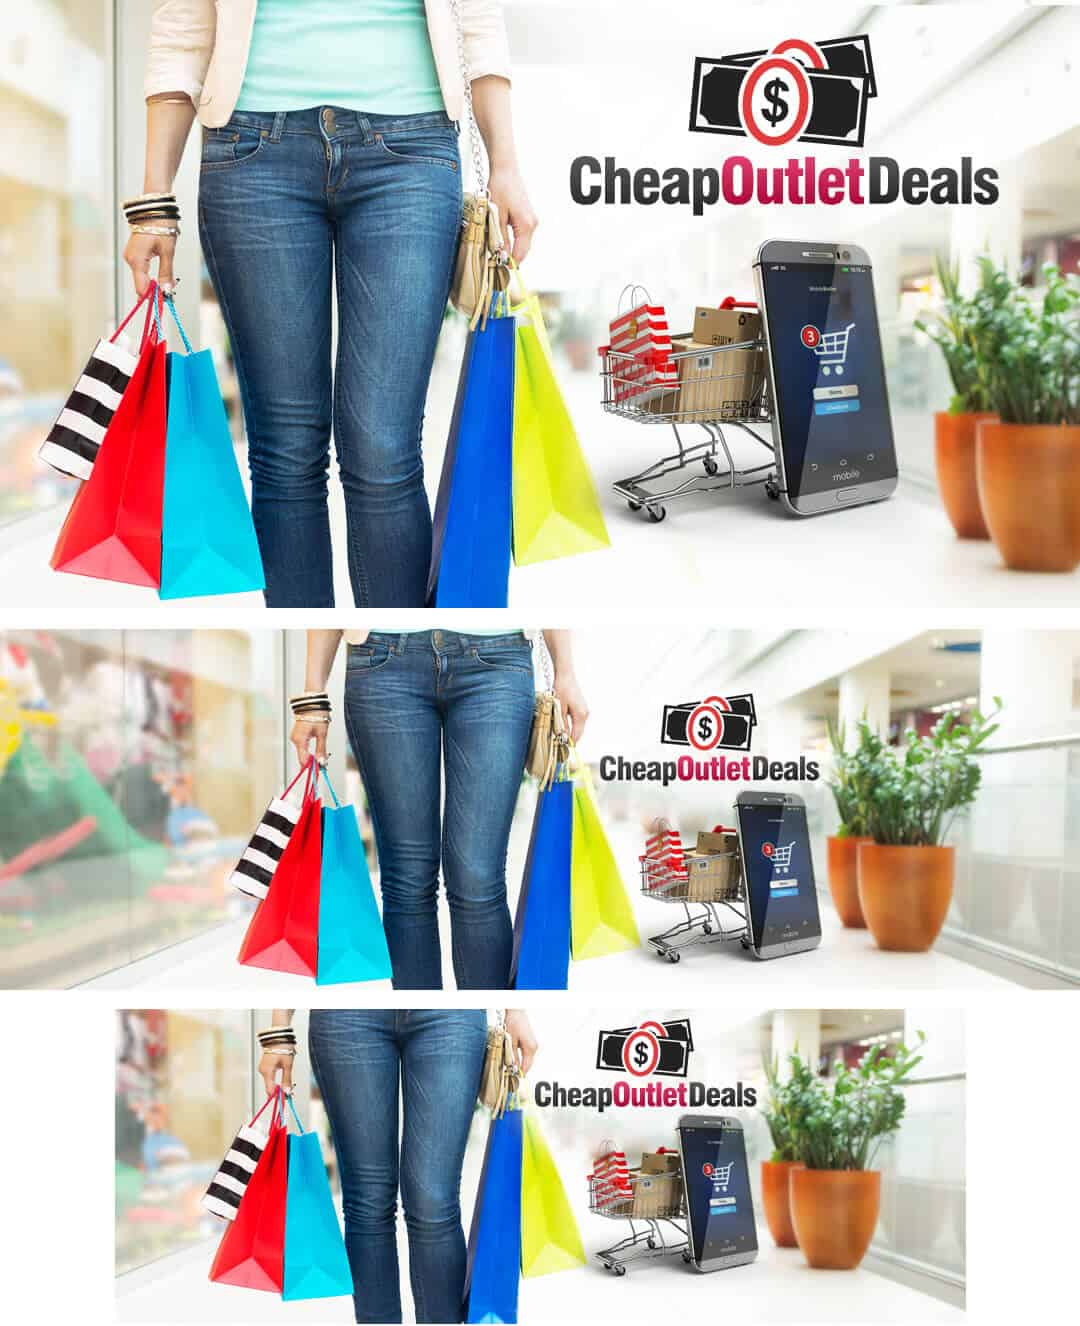 cheapoutletdeals social media package example